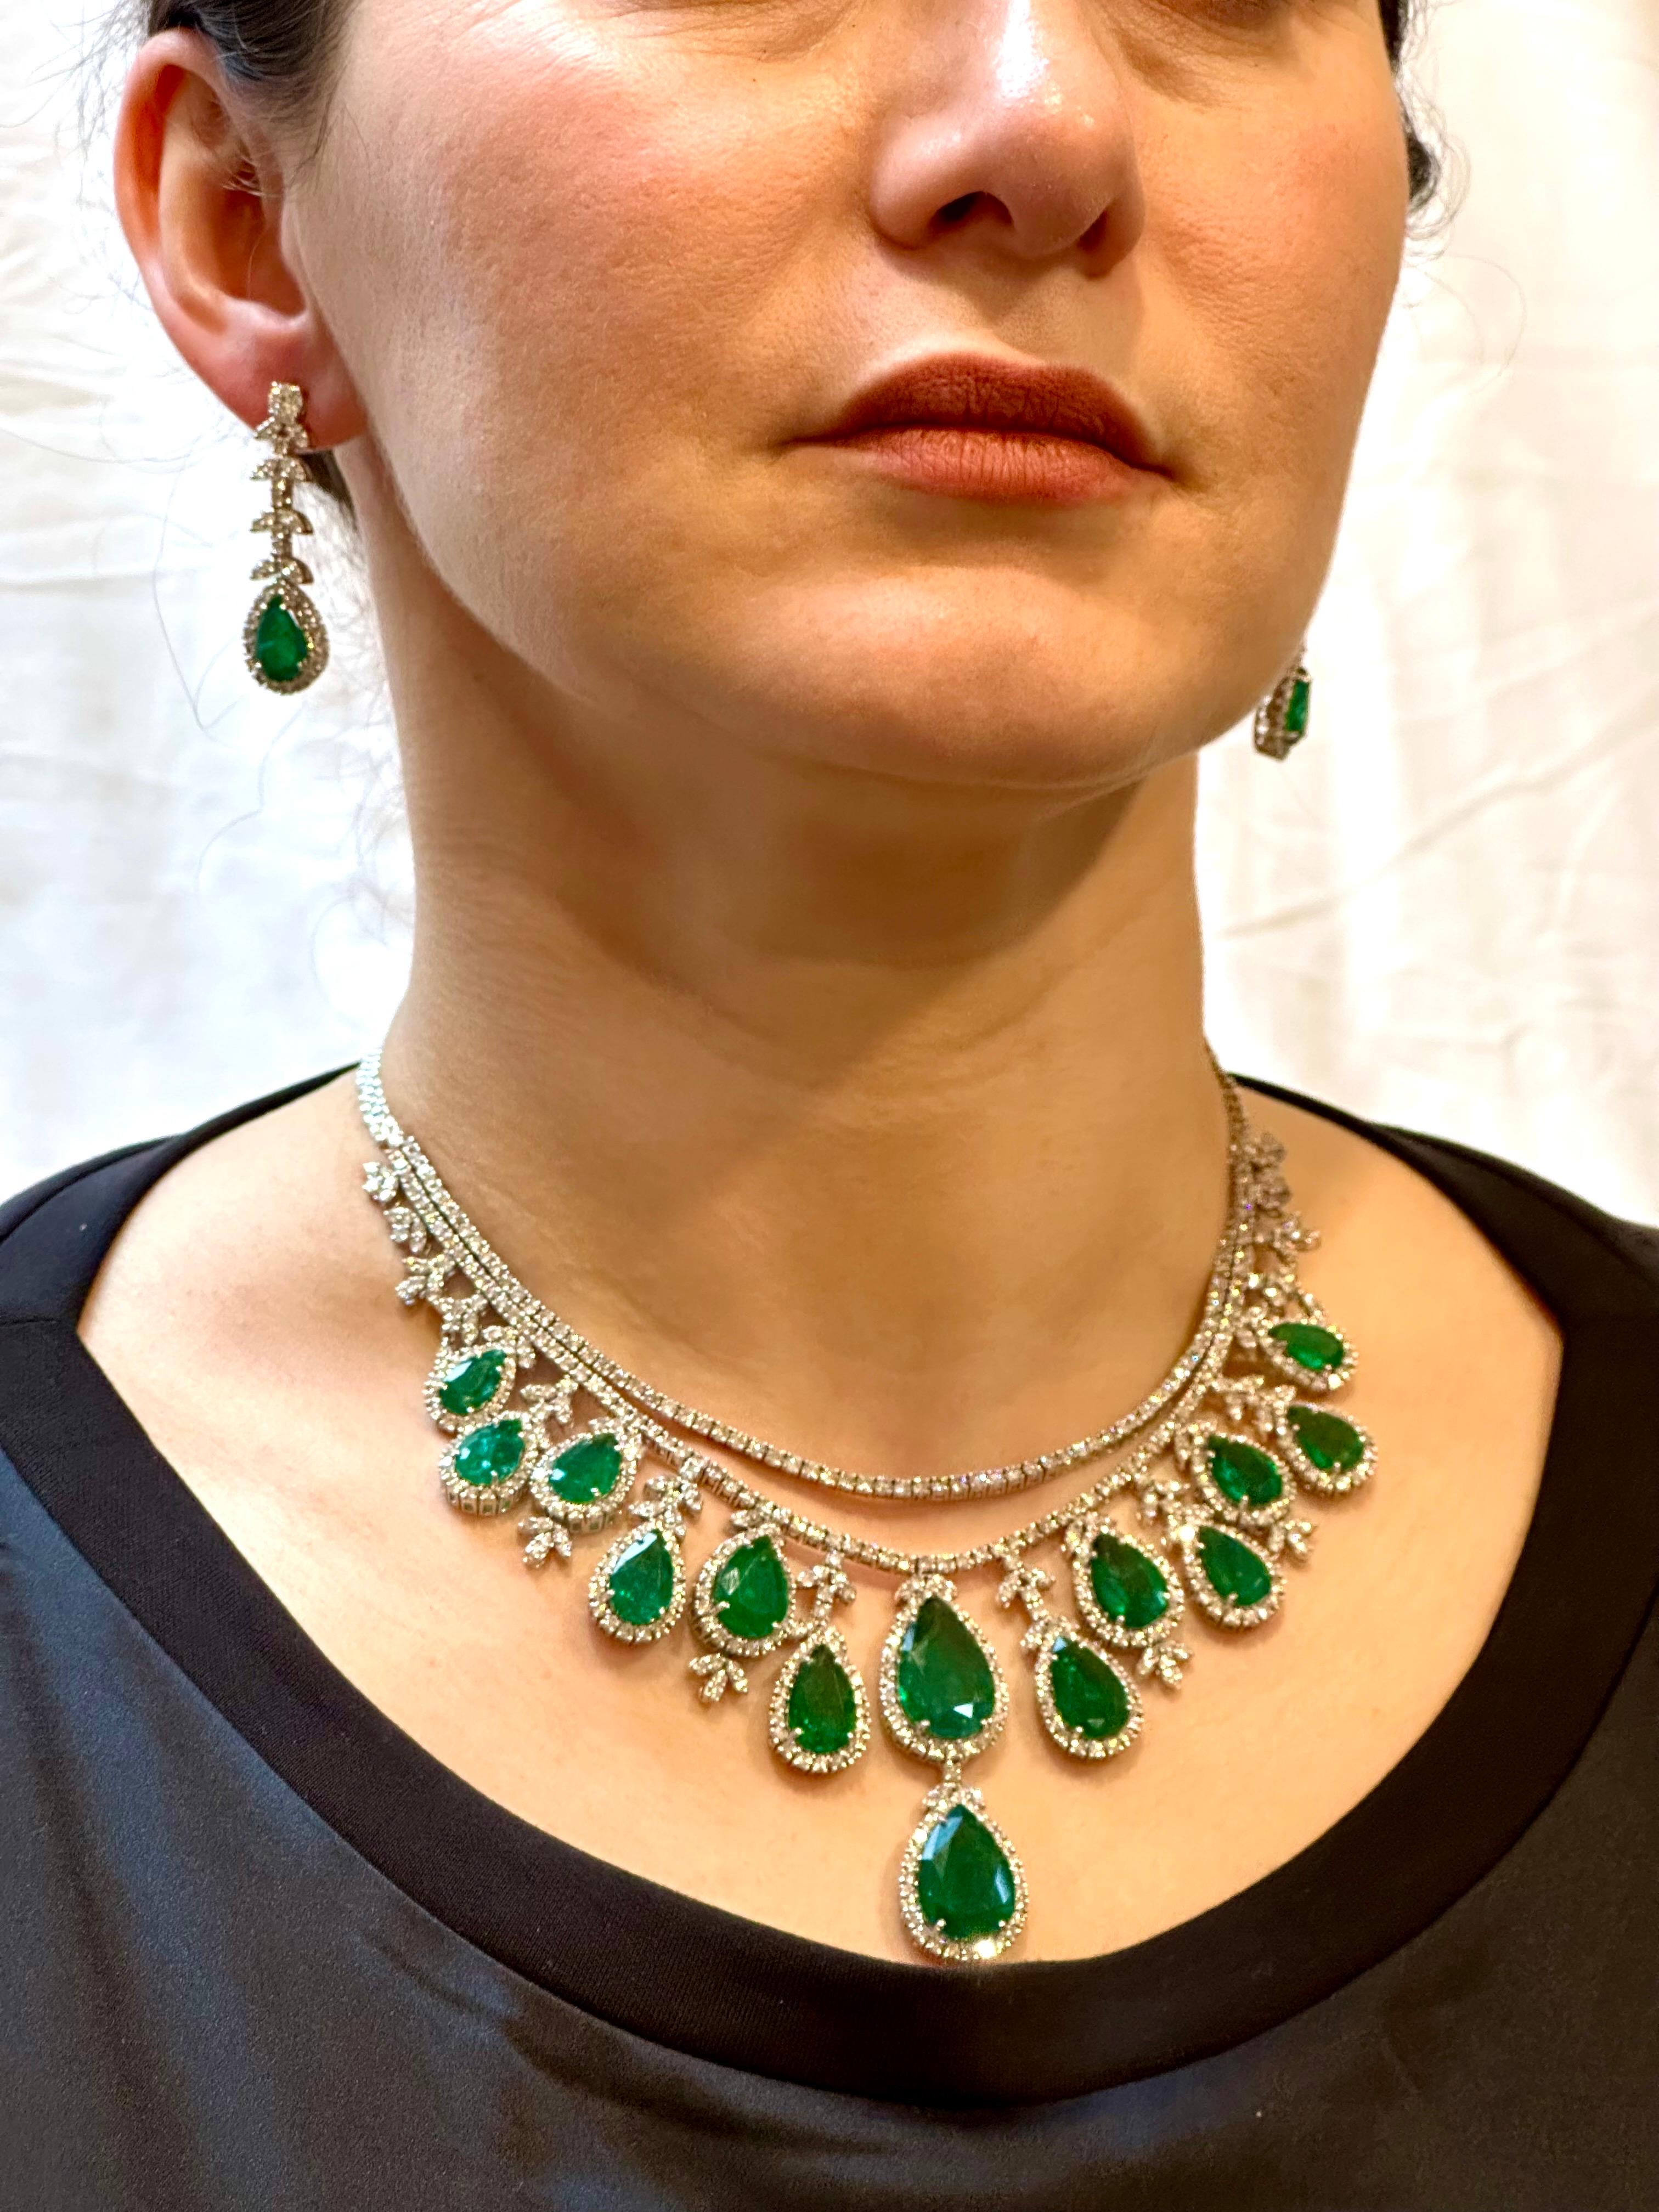 75 Ct Zambian Emerald and 30 Ct Diamond Necklace and Earring Bridal Suite For Sale 12